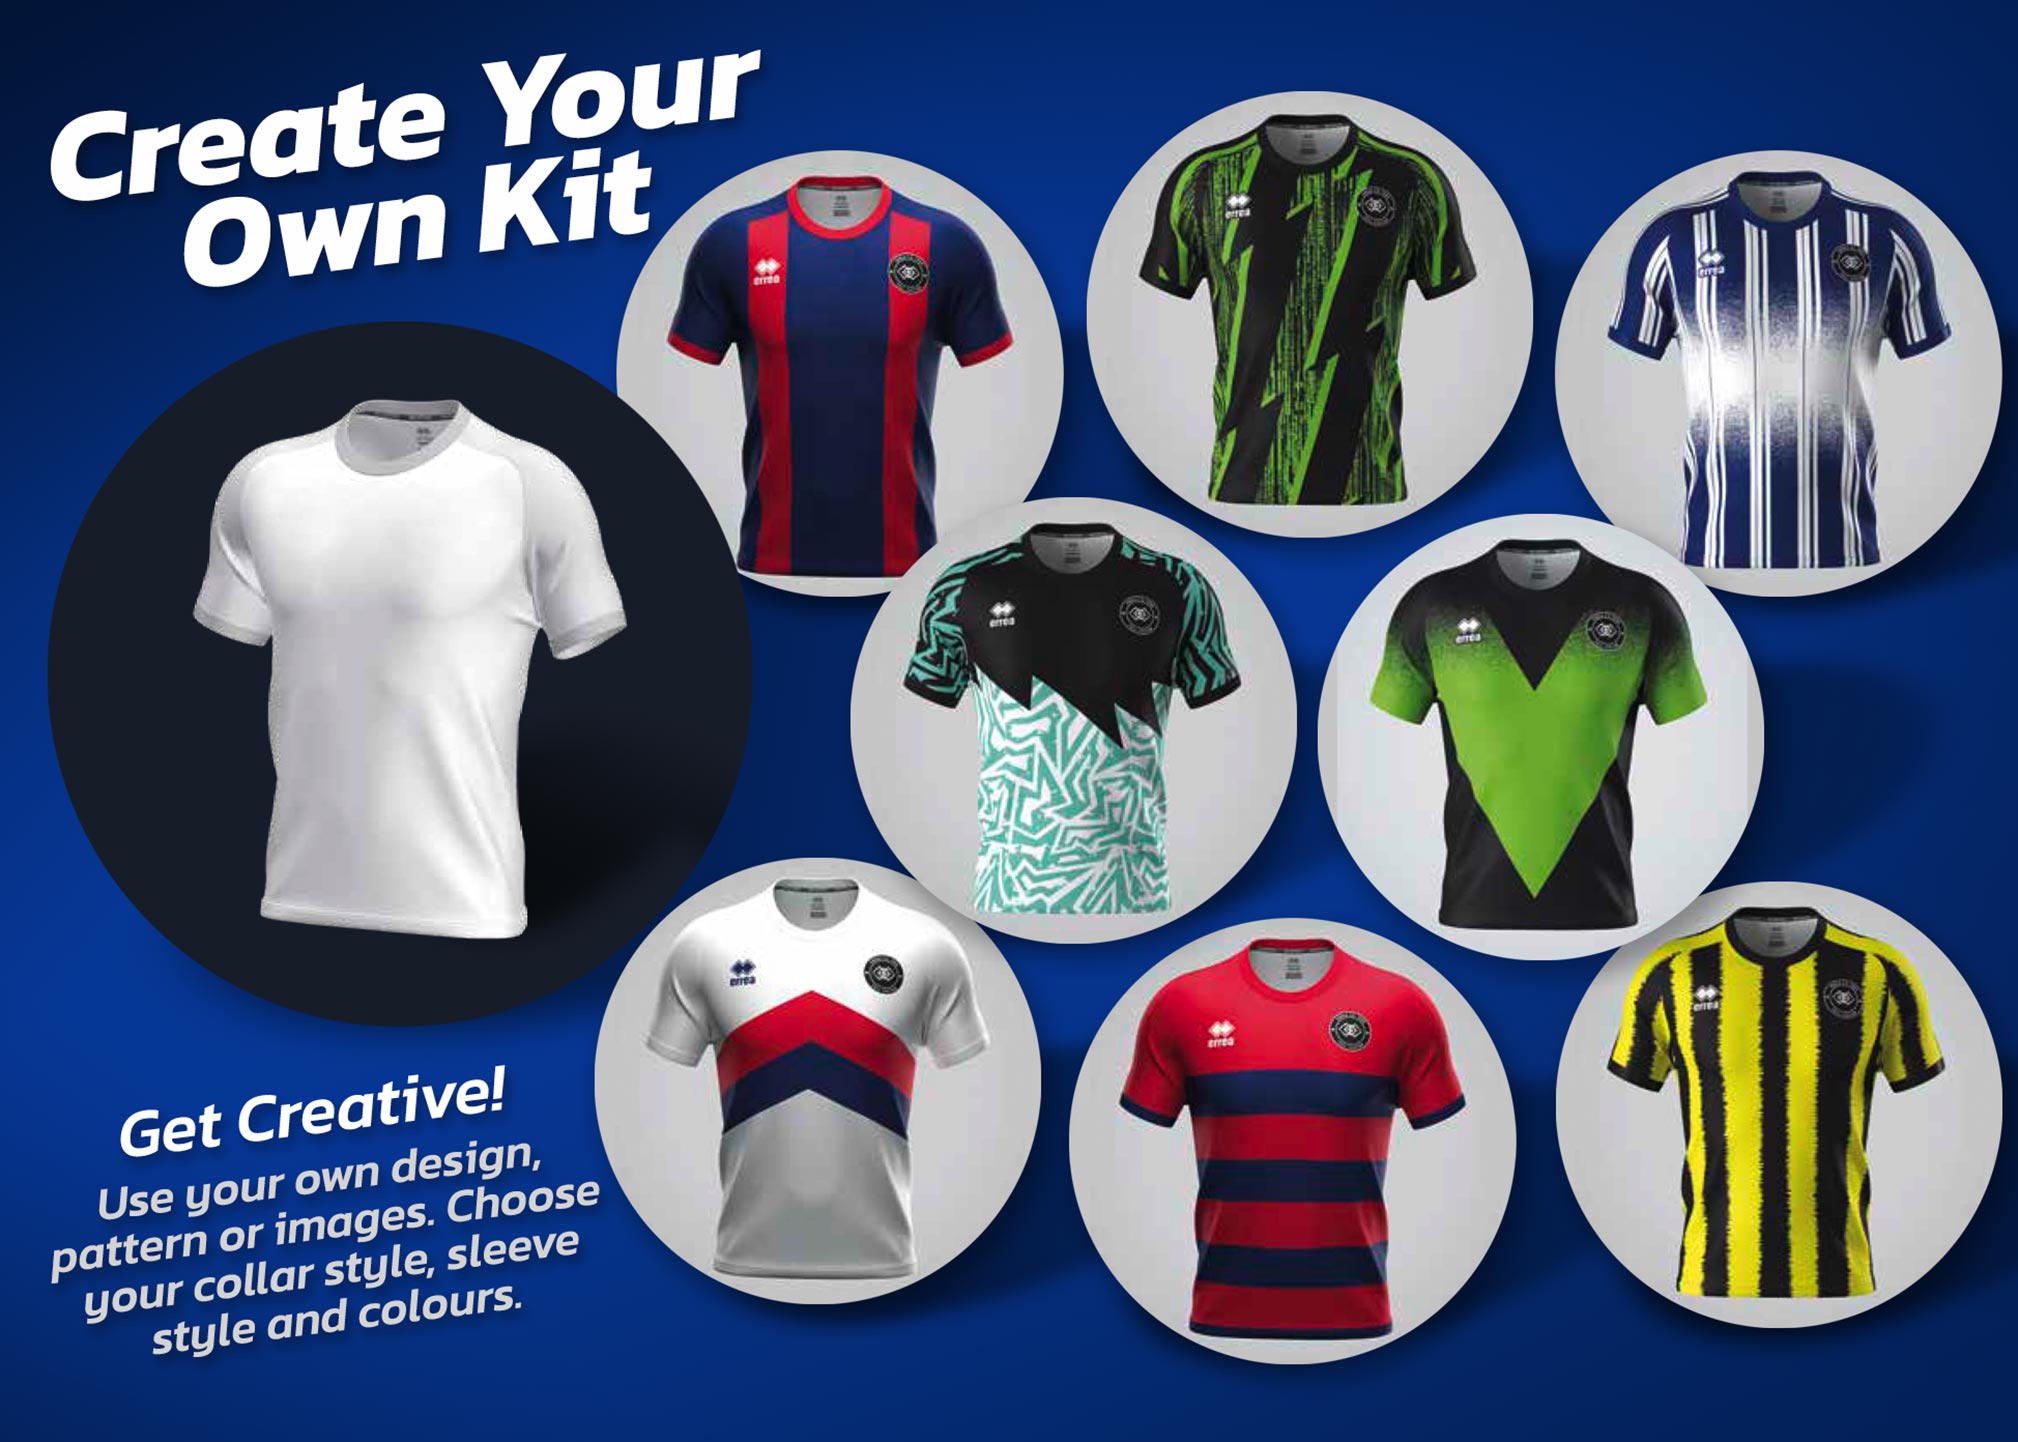 Create your own kit